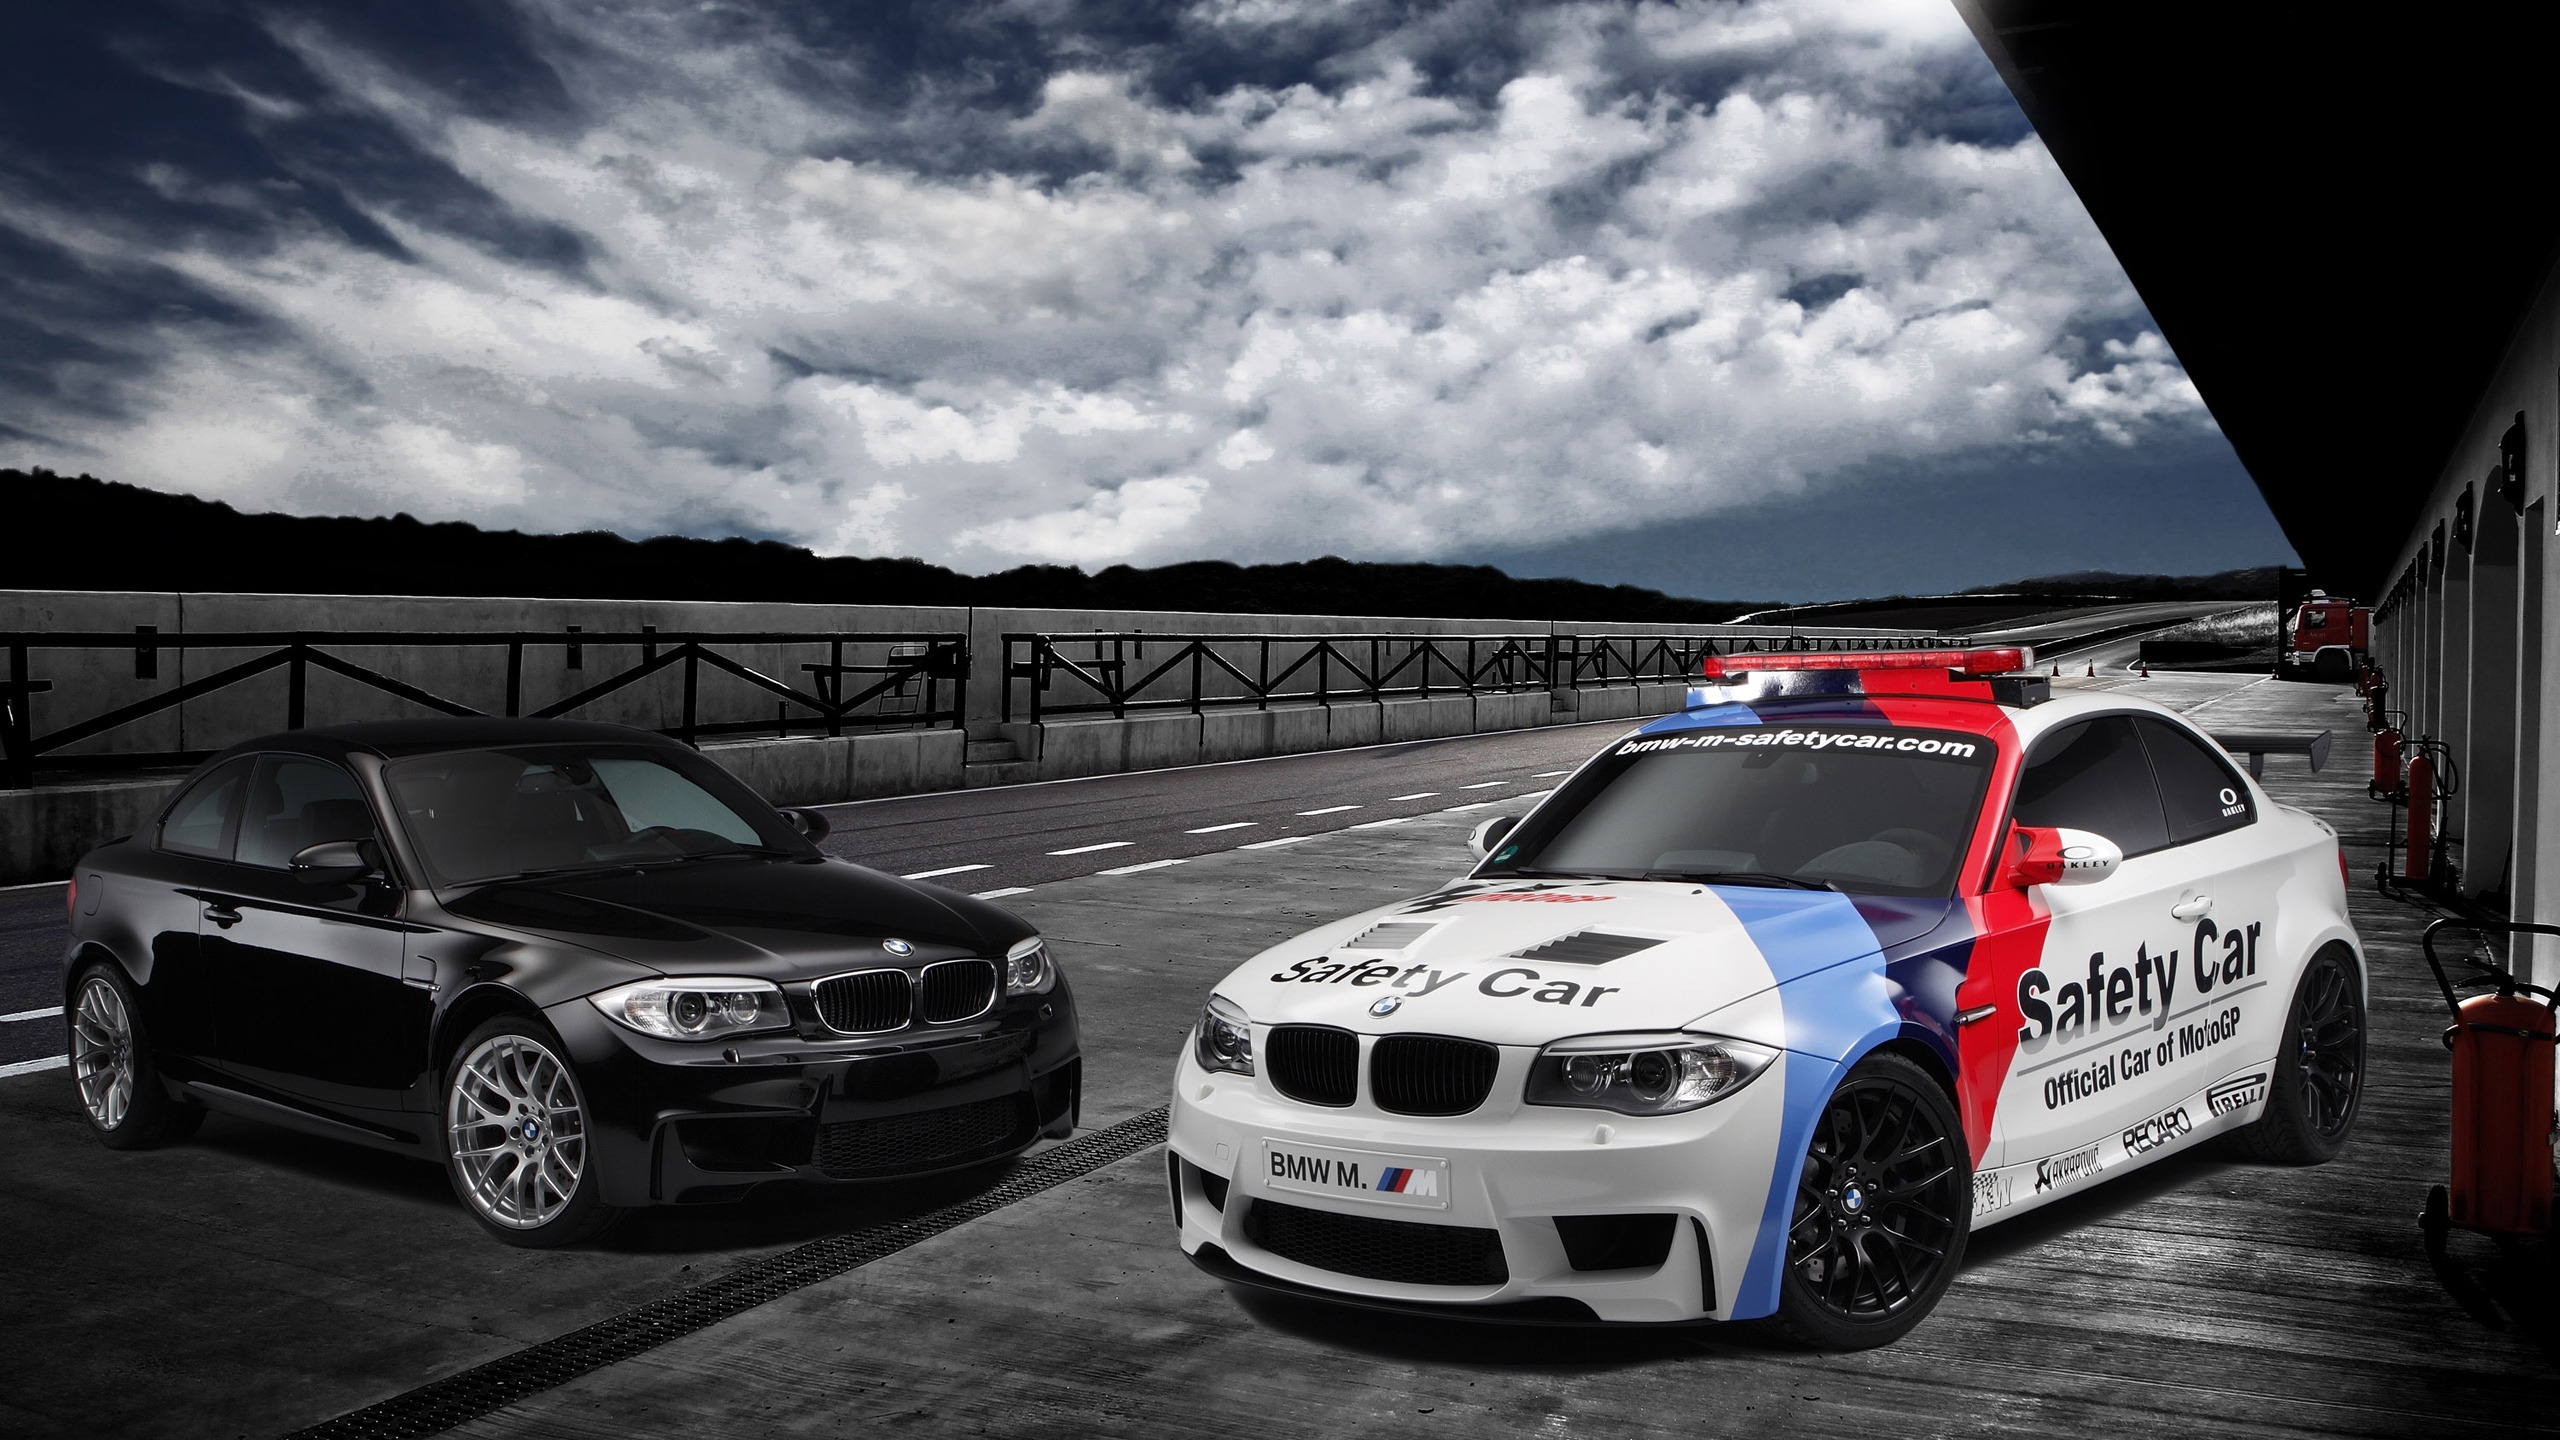 BMW 1 Series M Coupe Safety Car for 2560x1440 HDTV resolution